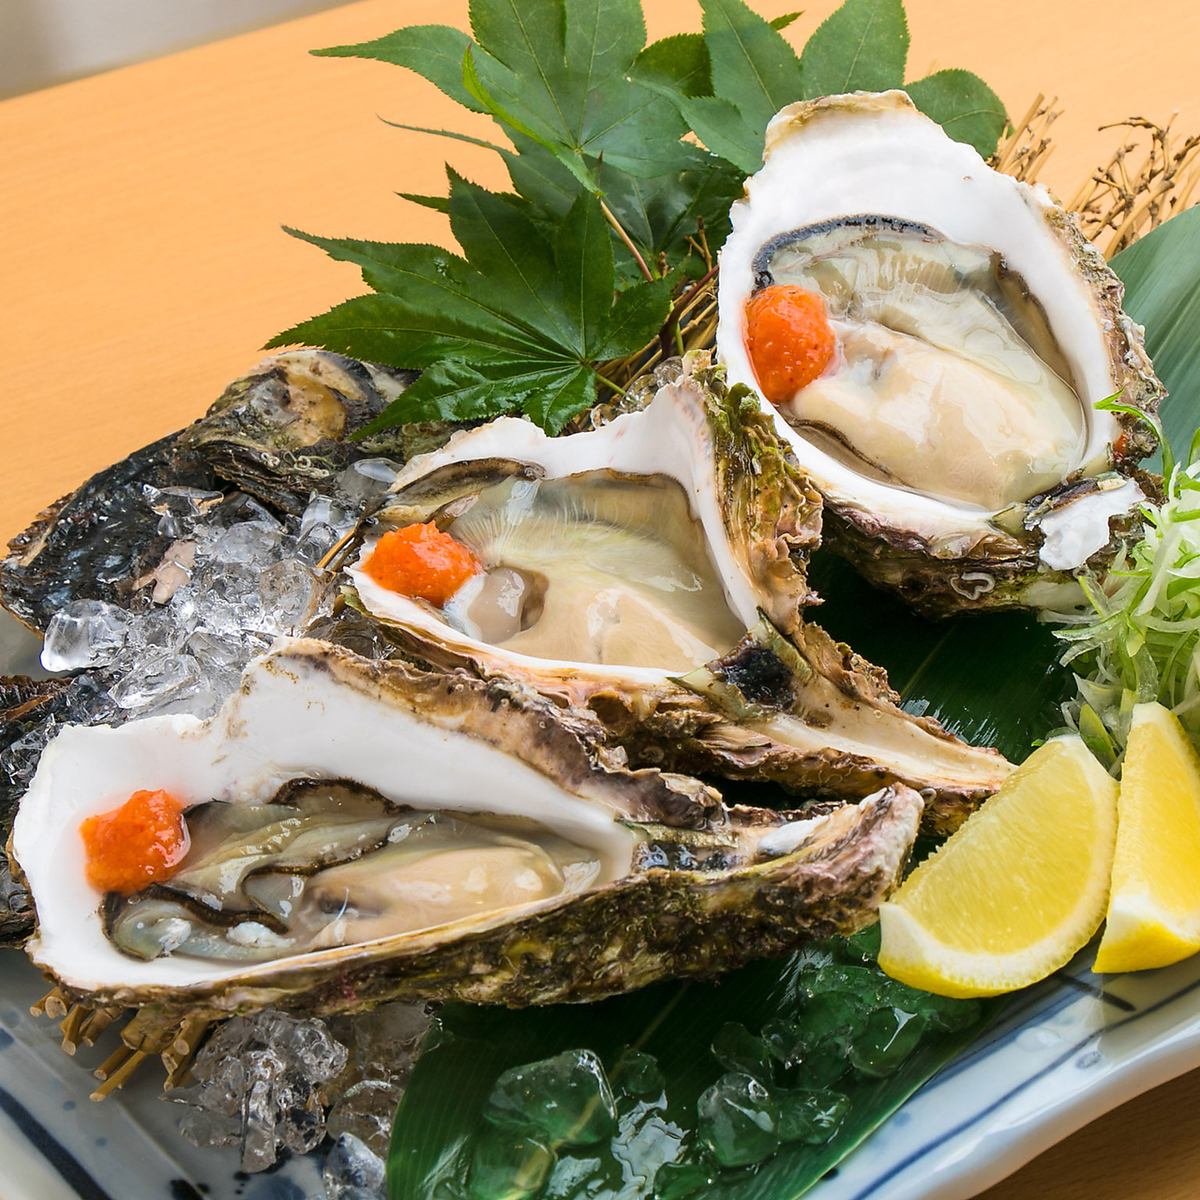 You can enjoy fresh seafood dishes including oysters at our restaurant.